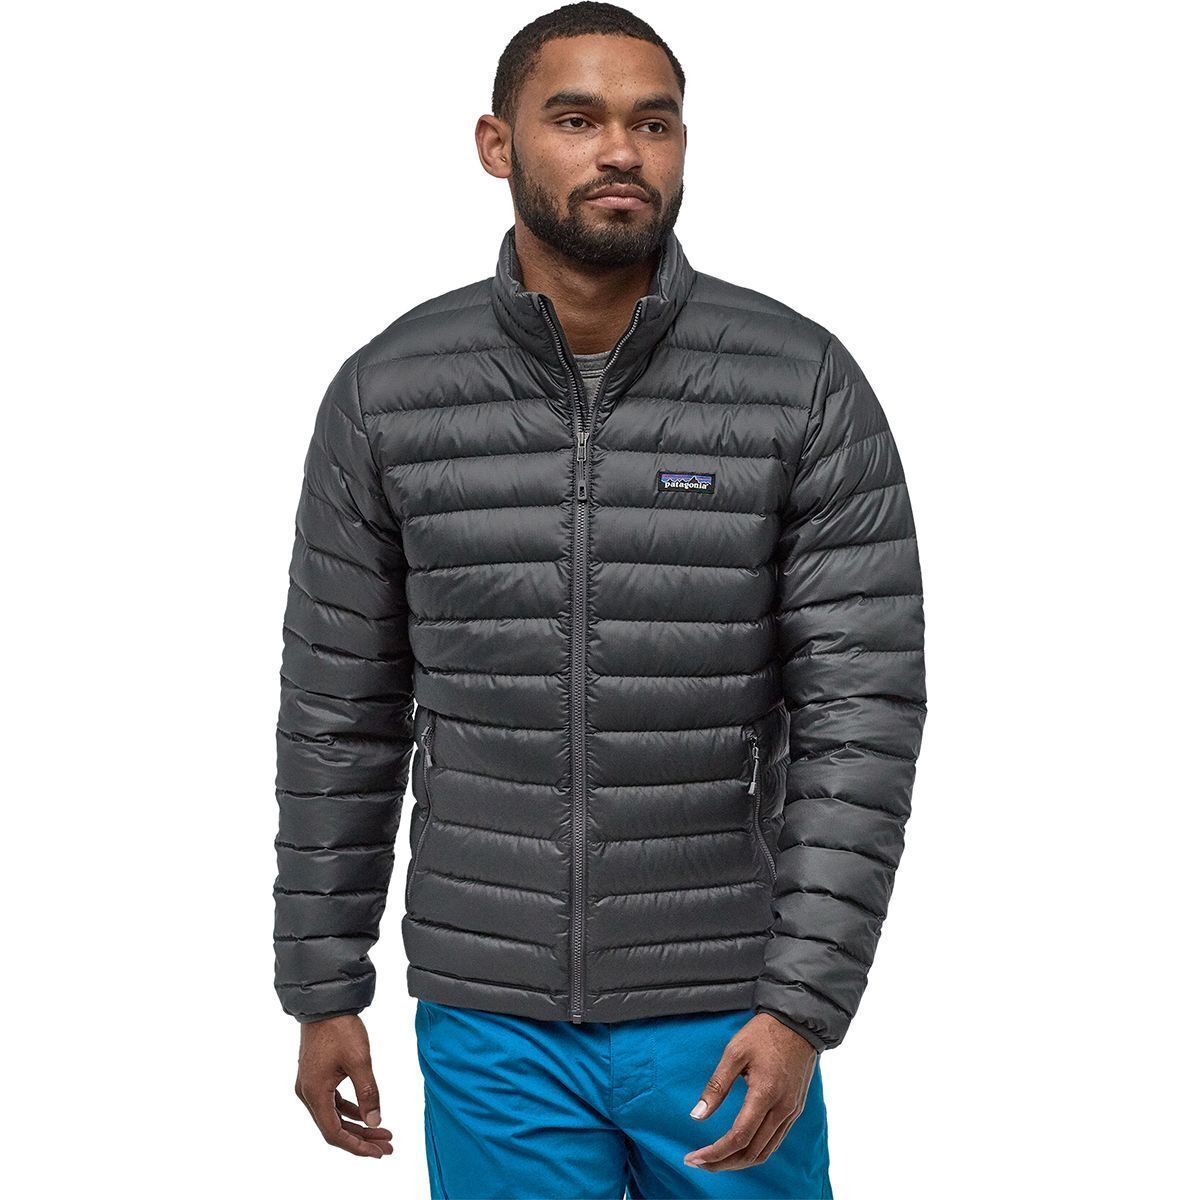 Patagonia Down Sweater Jacket - Men's | Backcountry.com